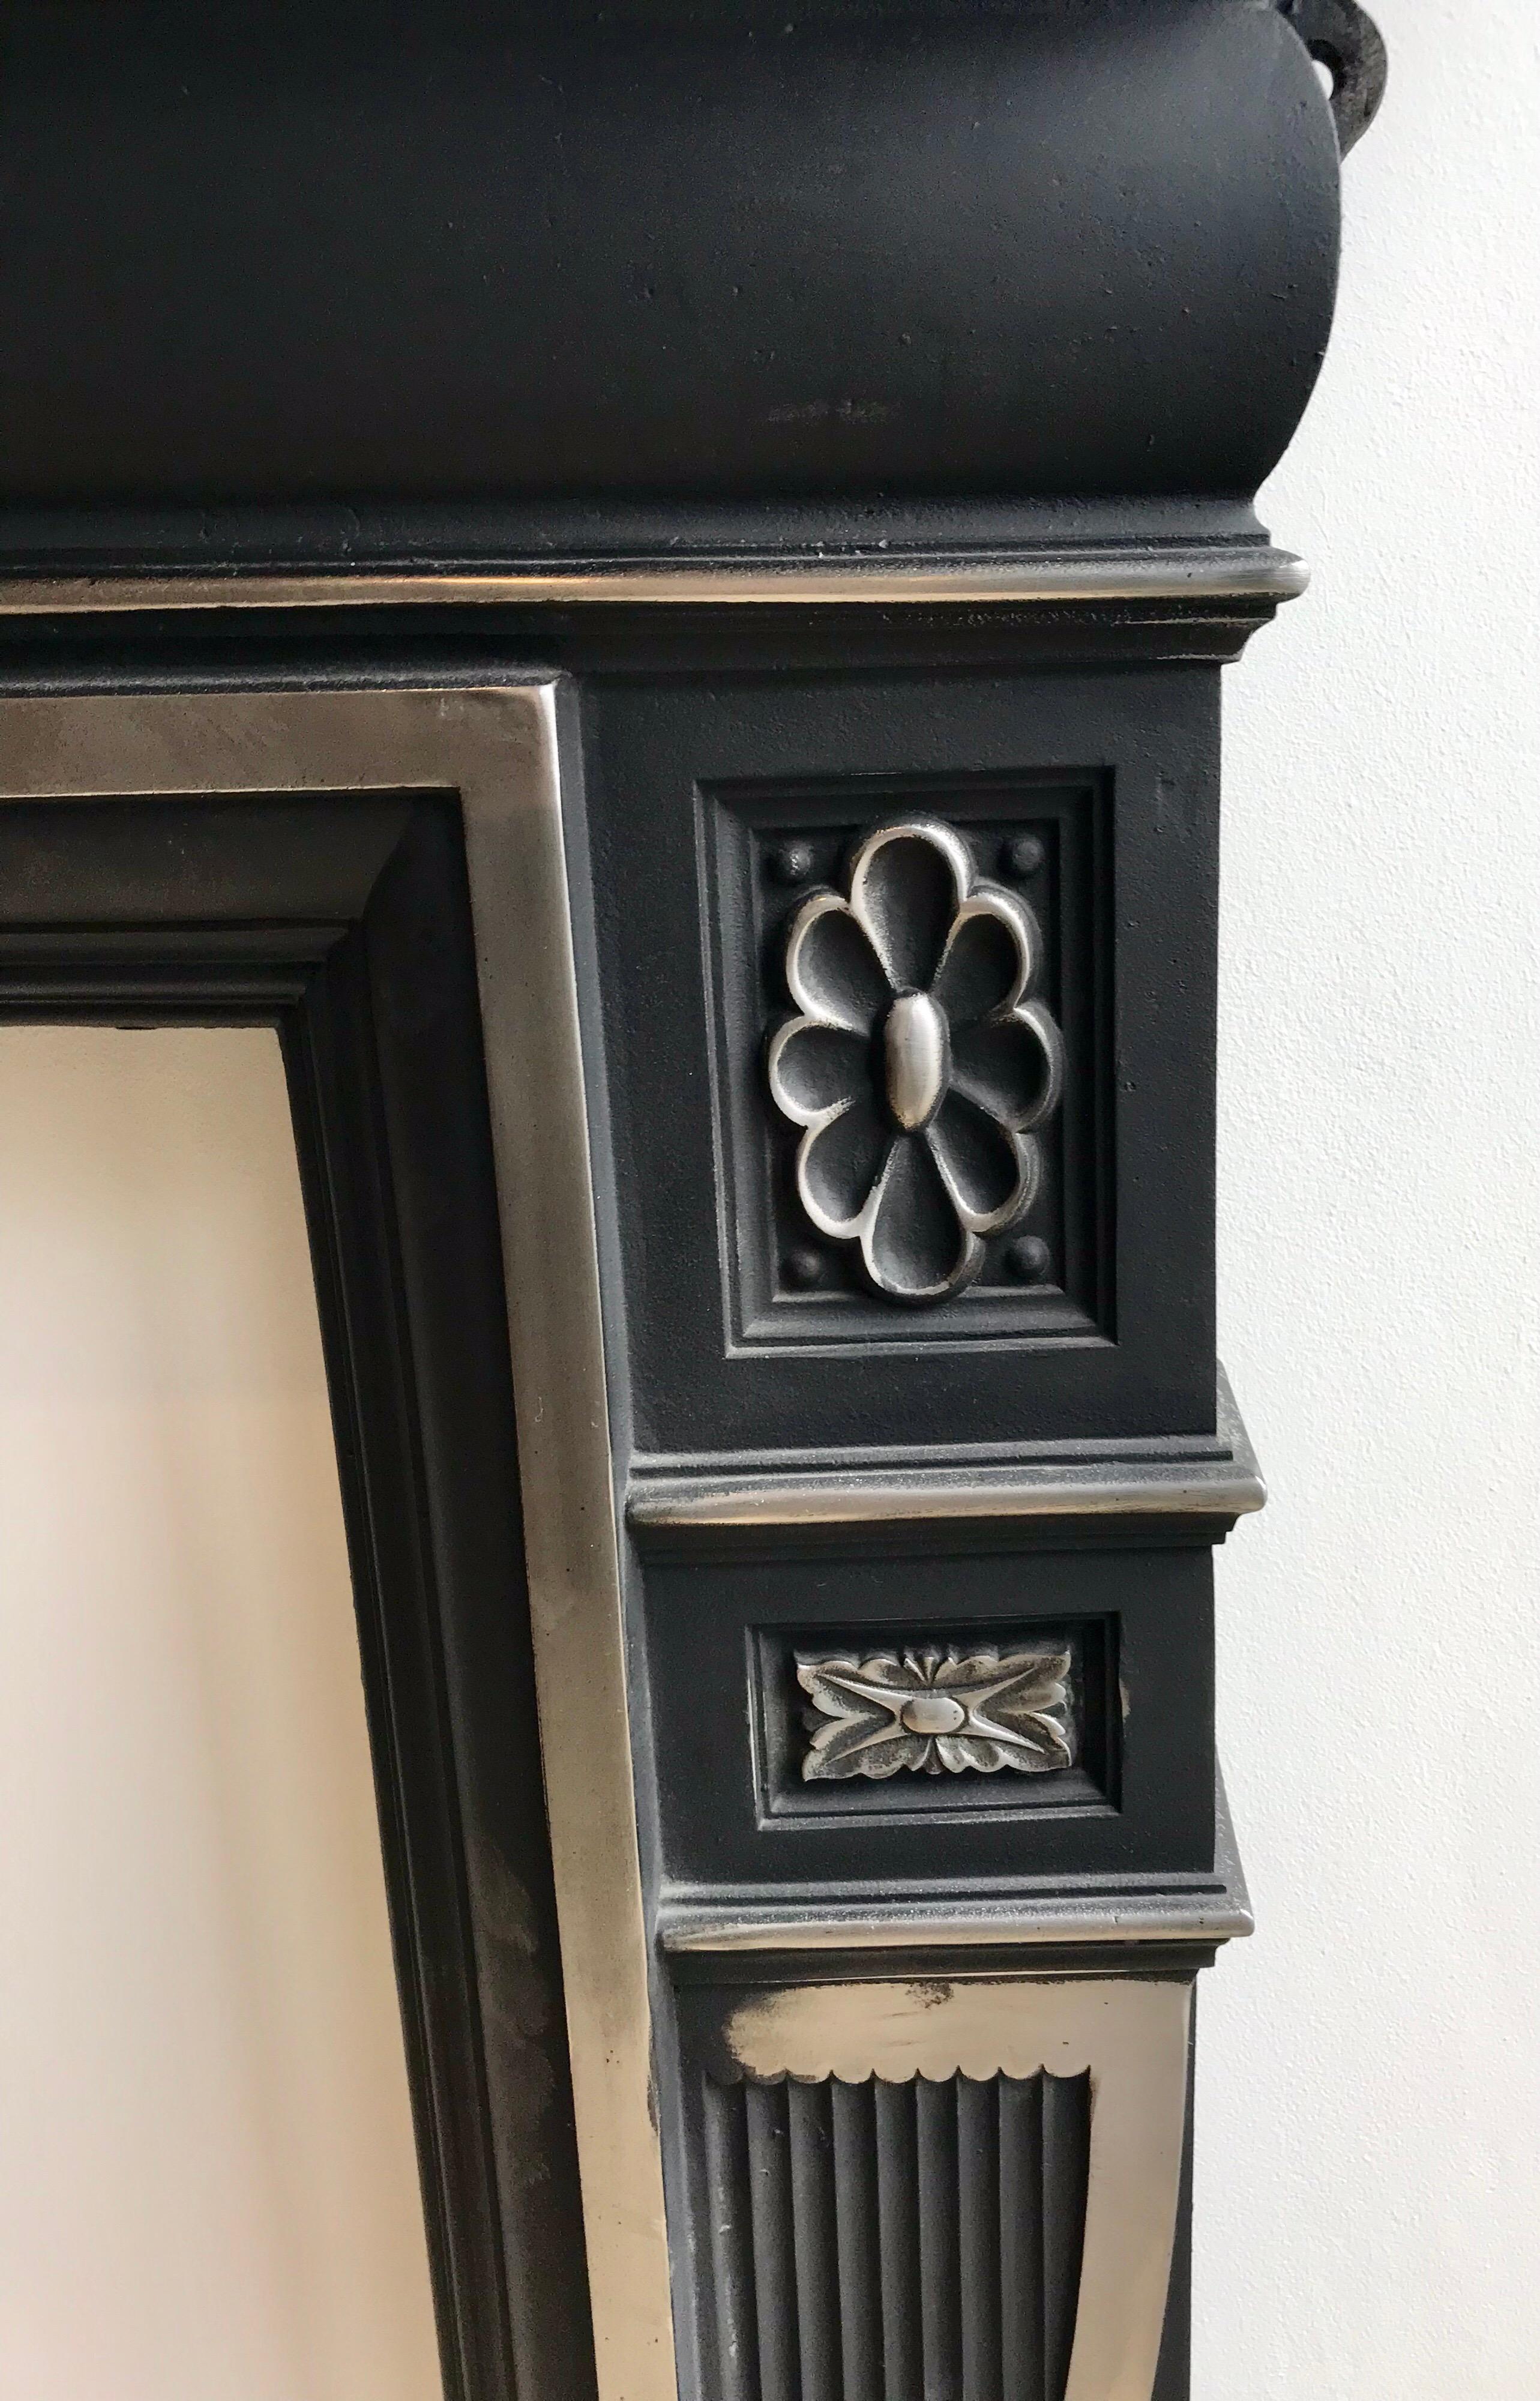 An elegant Victorian original cast iron mantelpiece.
Salvaged from a London town house with highlight polished finish.